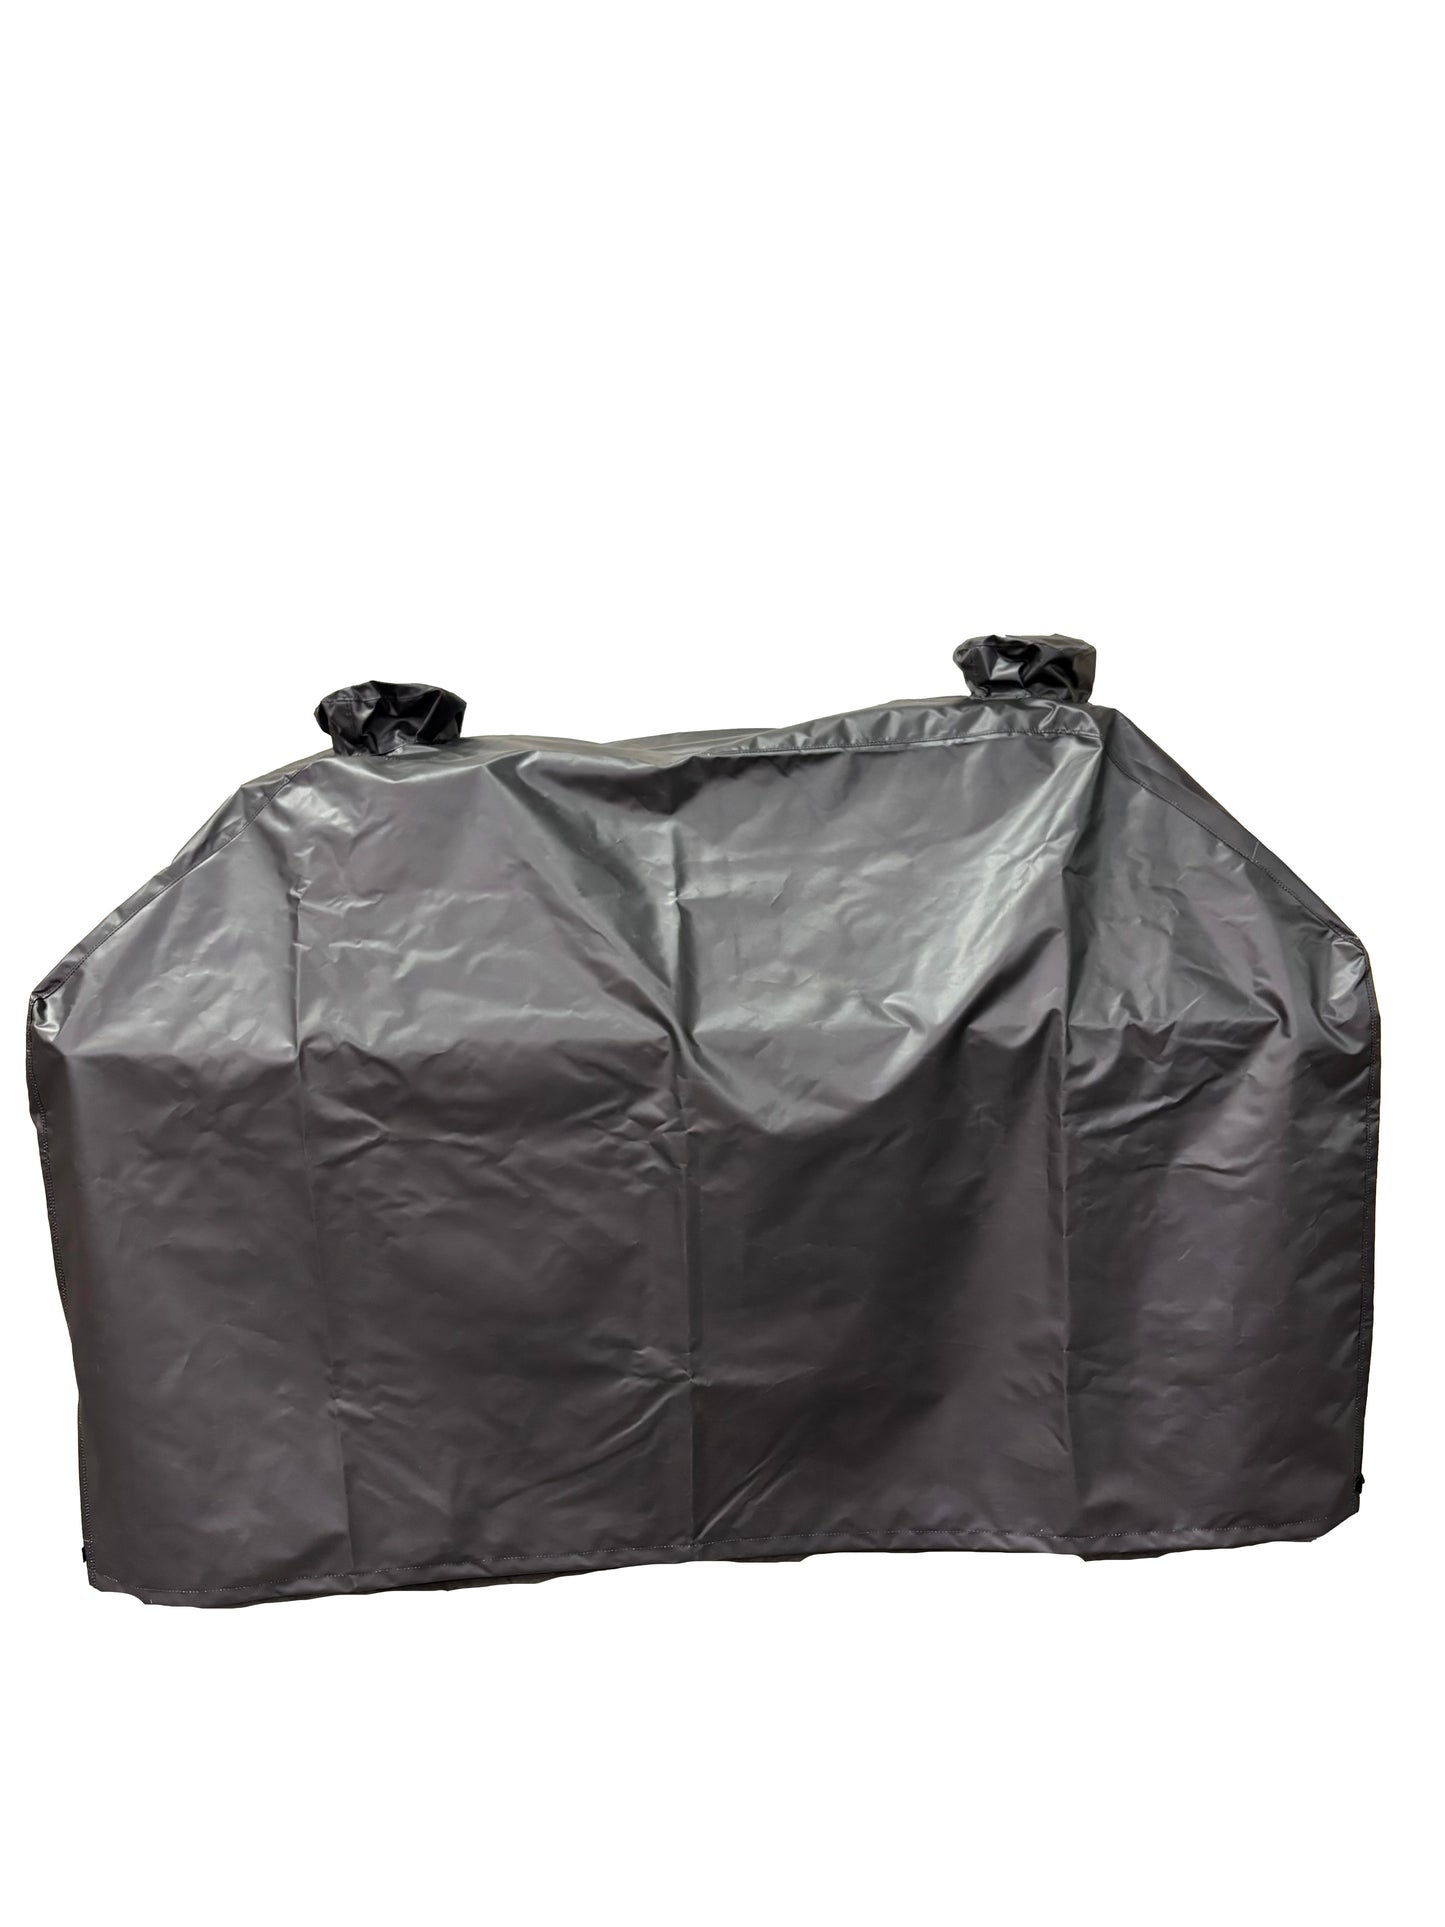 Duo Grill Cart Cover